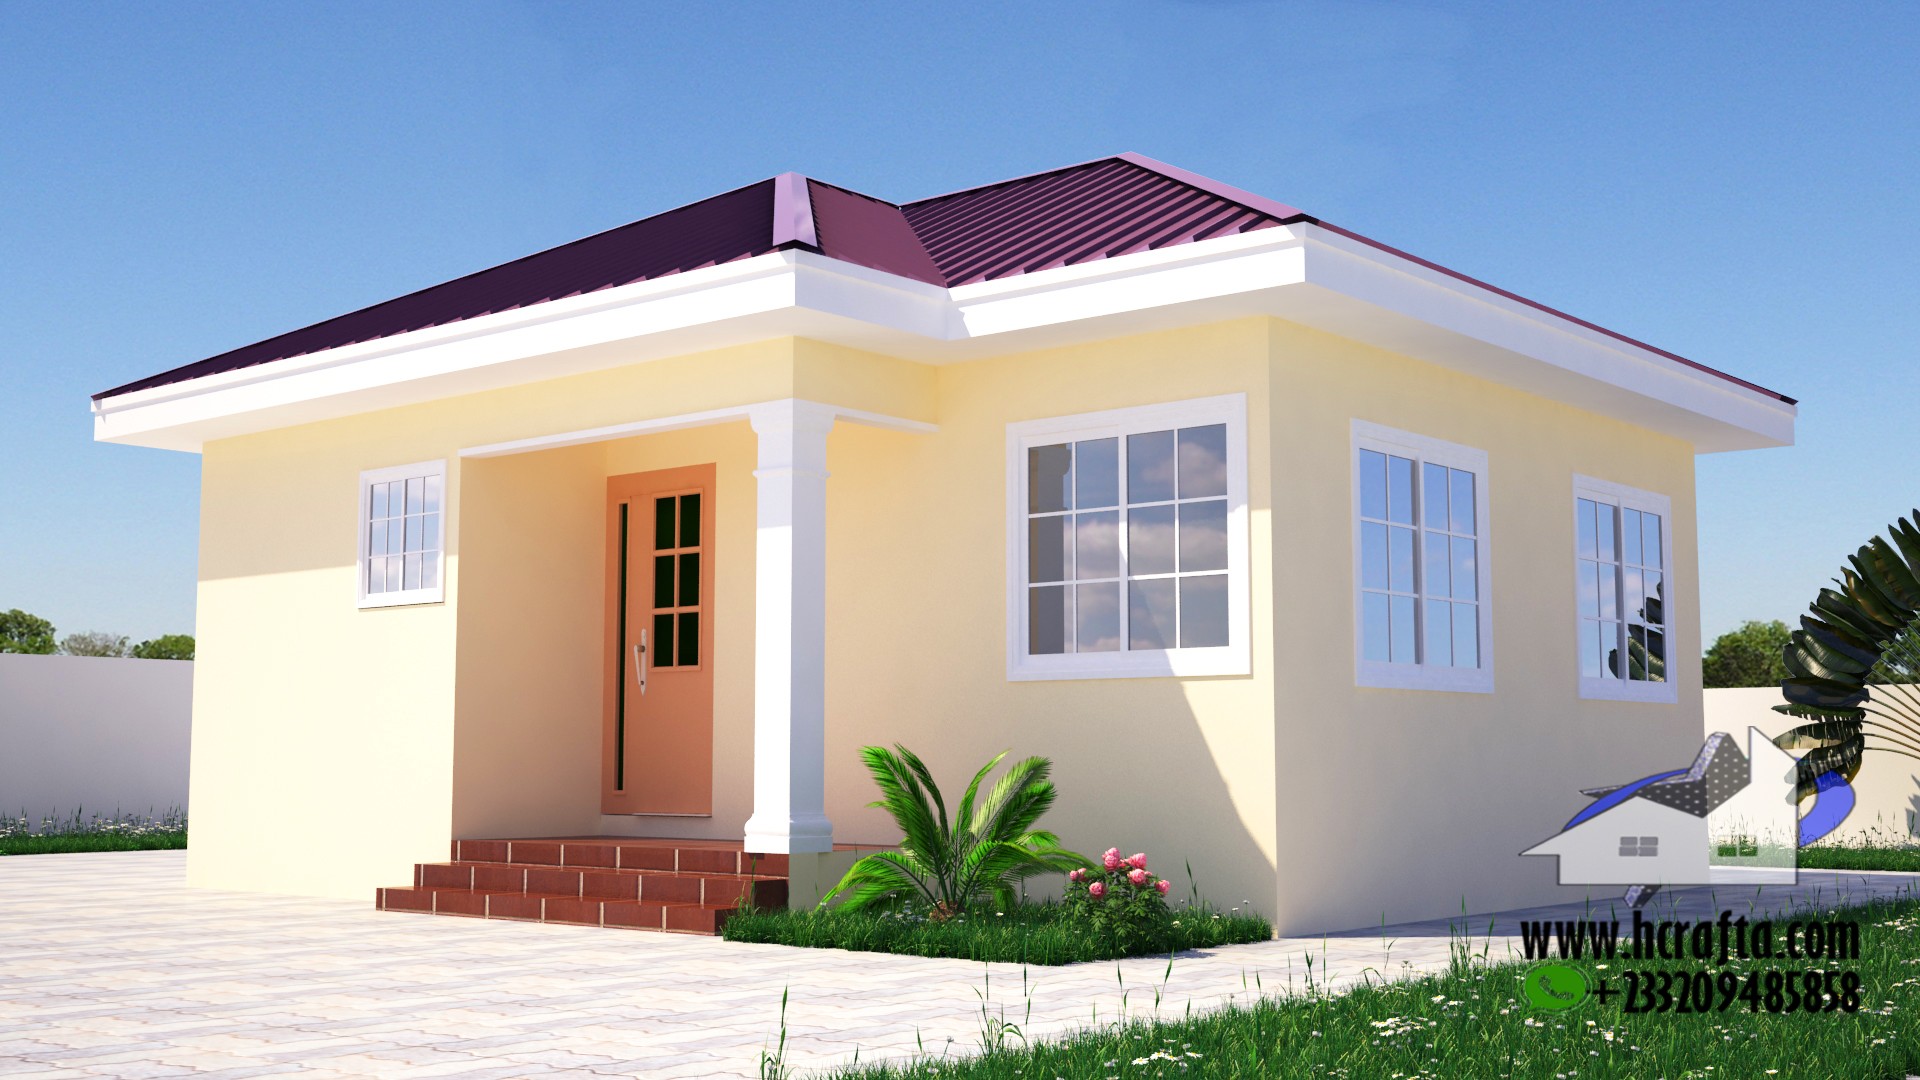 1 Bedroom House Design | affordable self contain | hCrafta